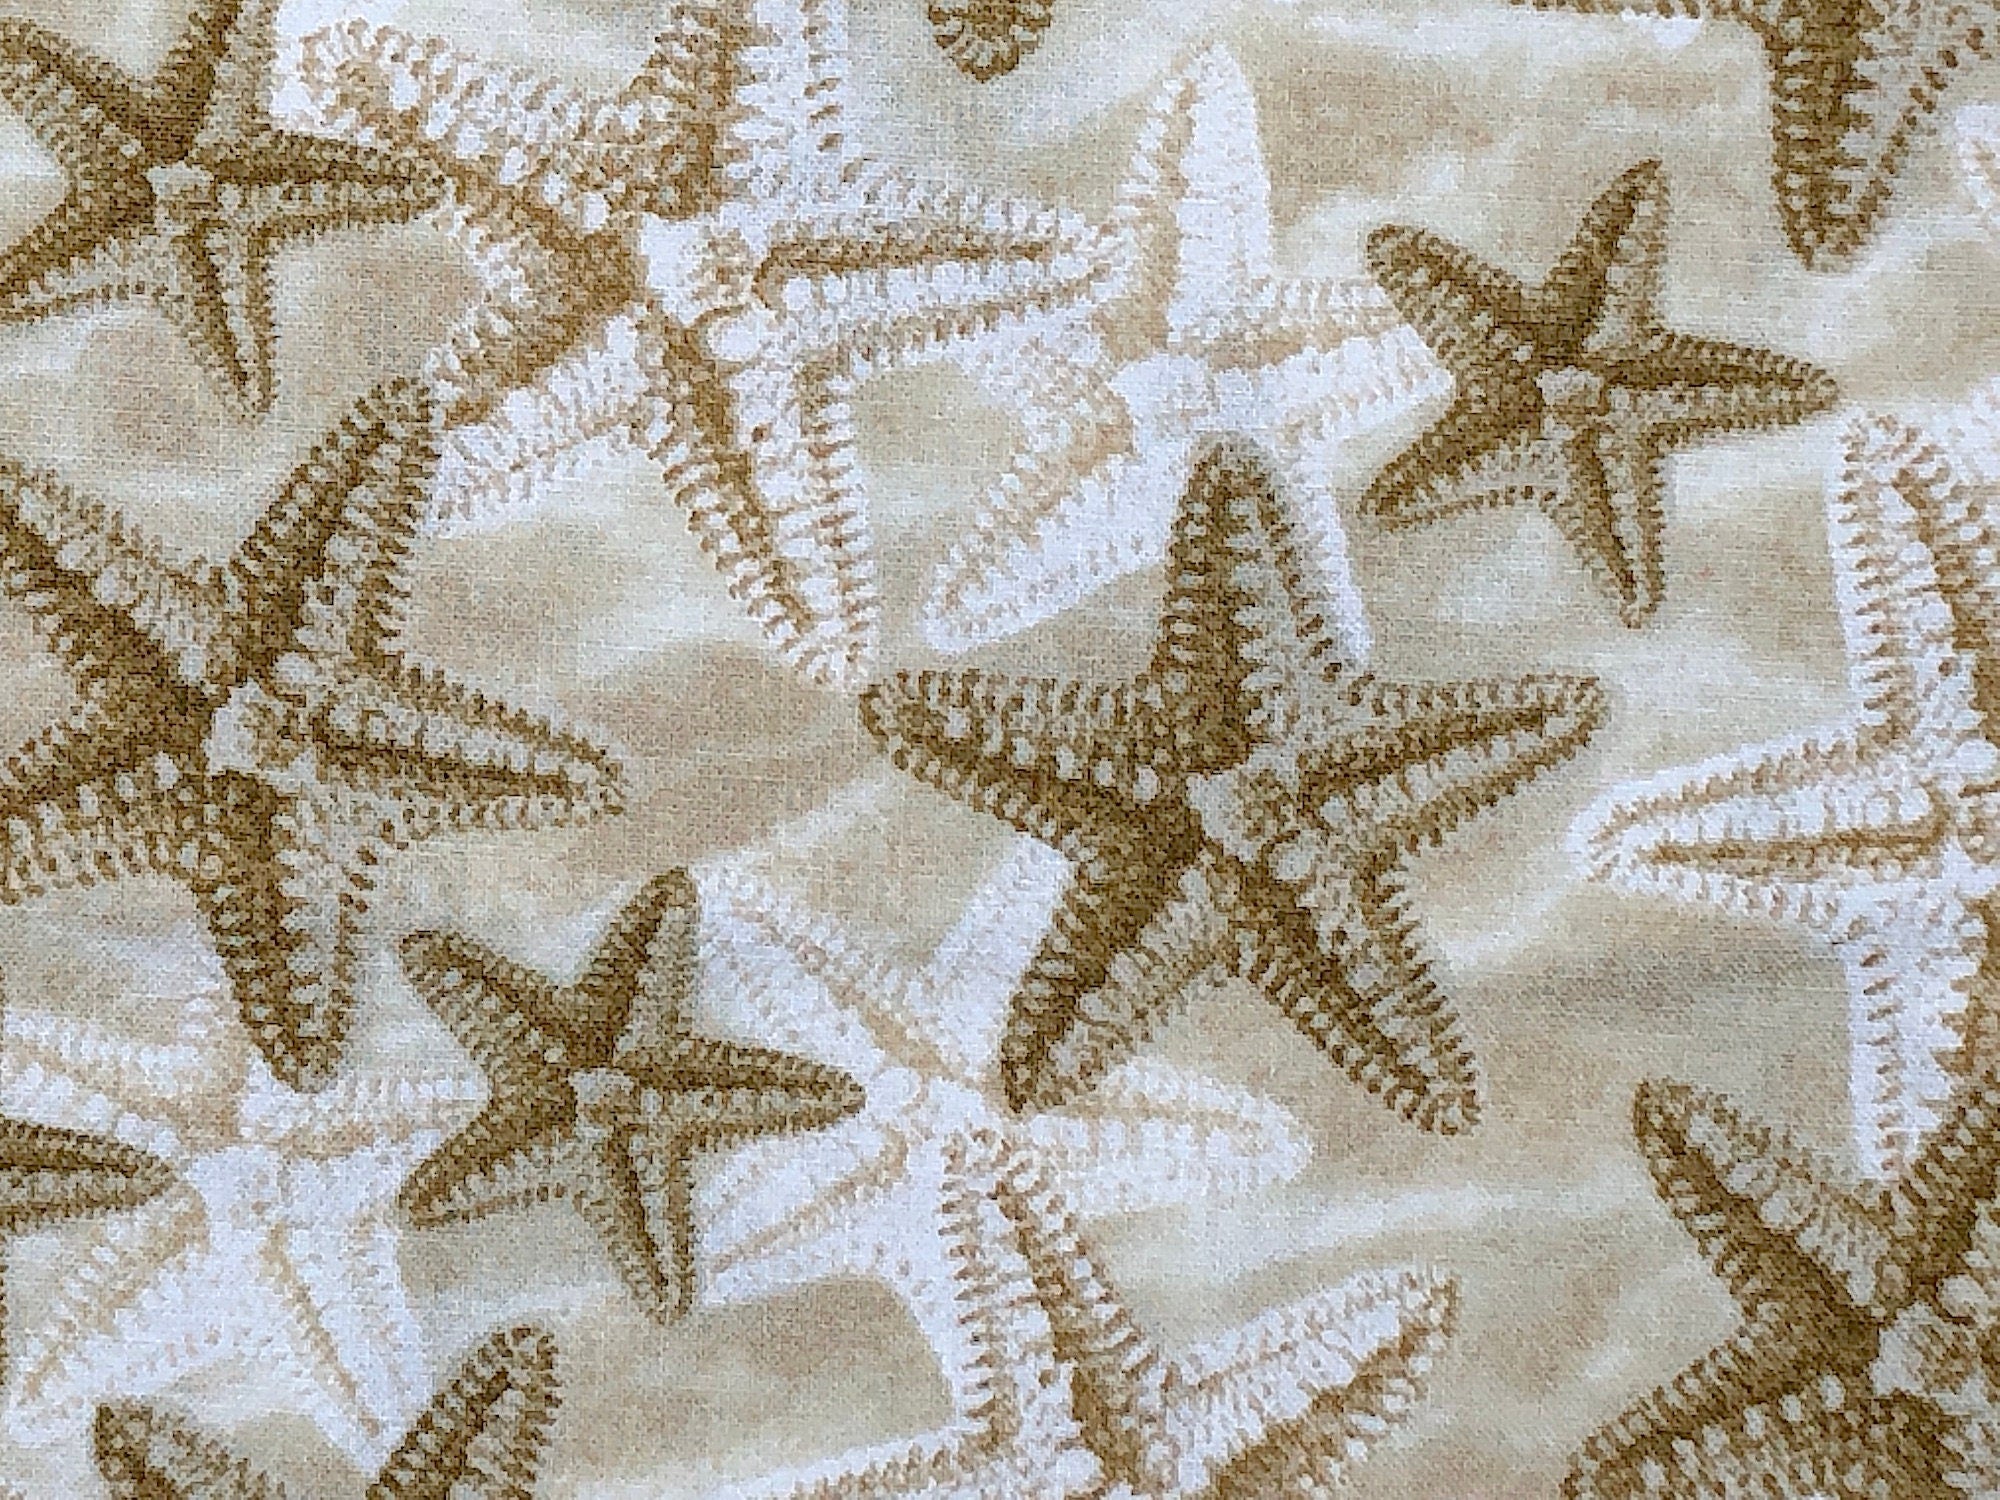 Close up of starfish in the sand.